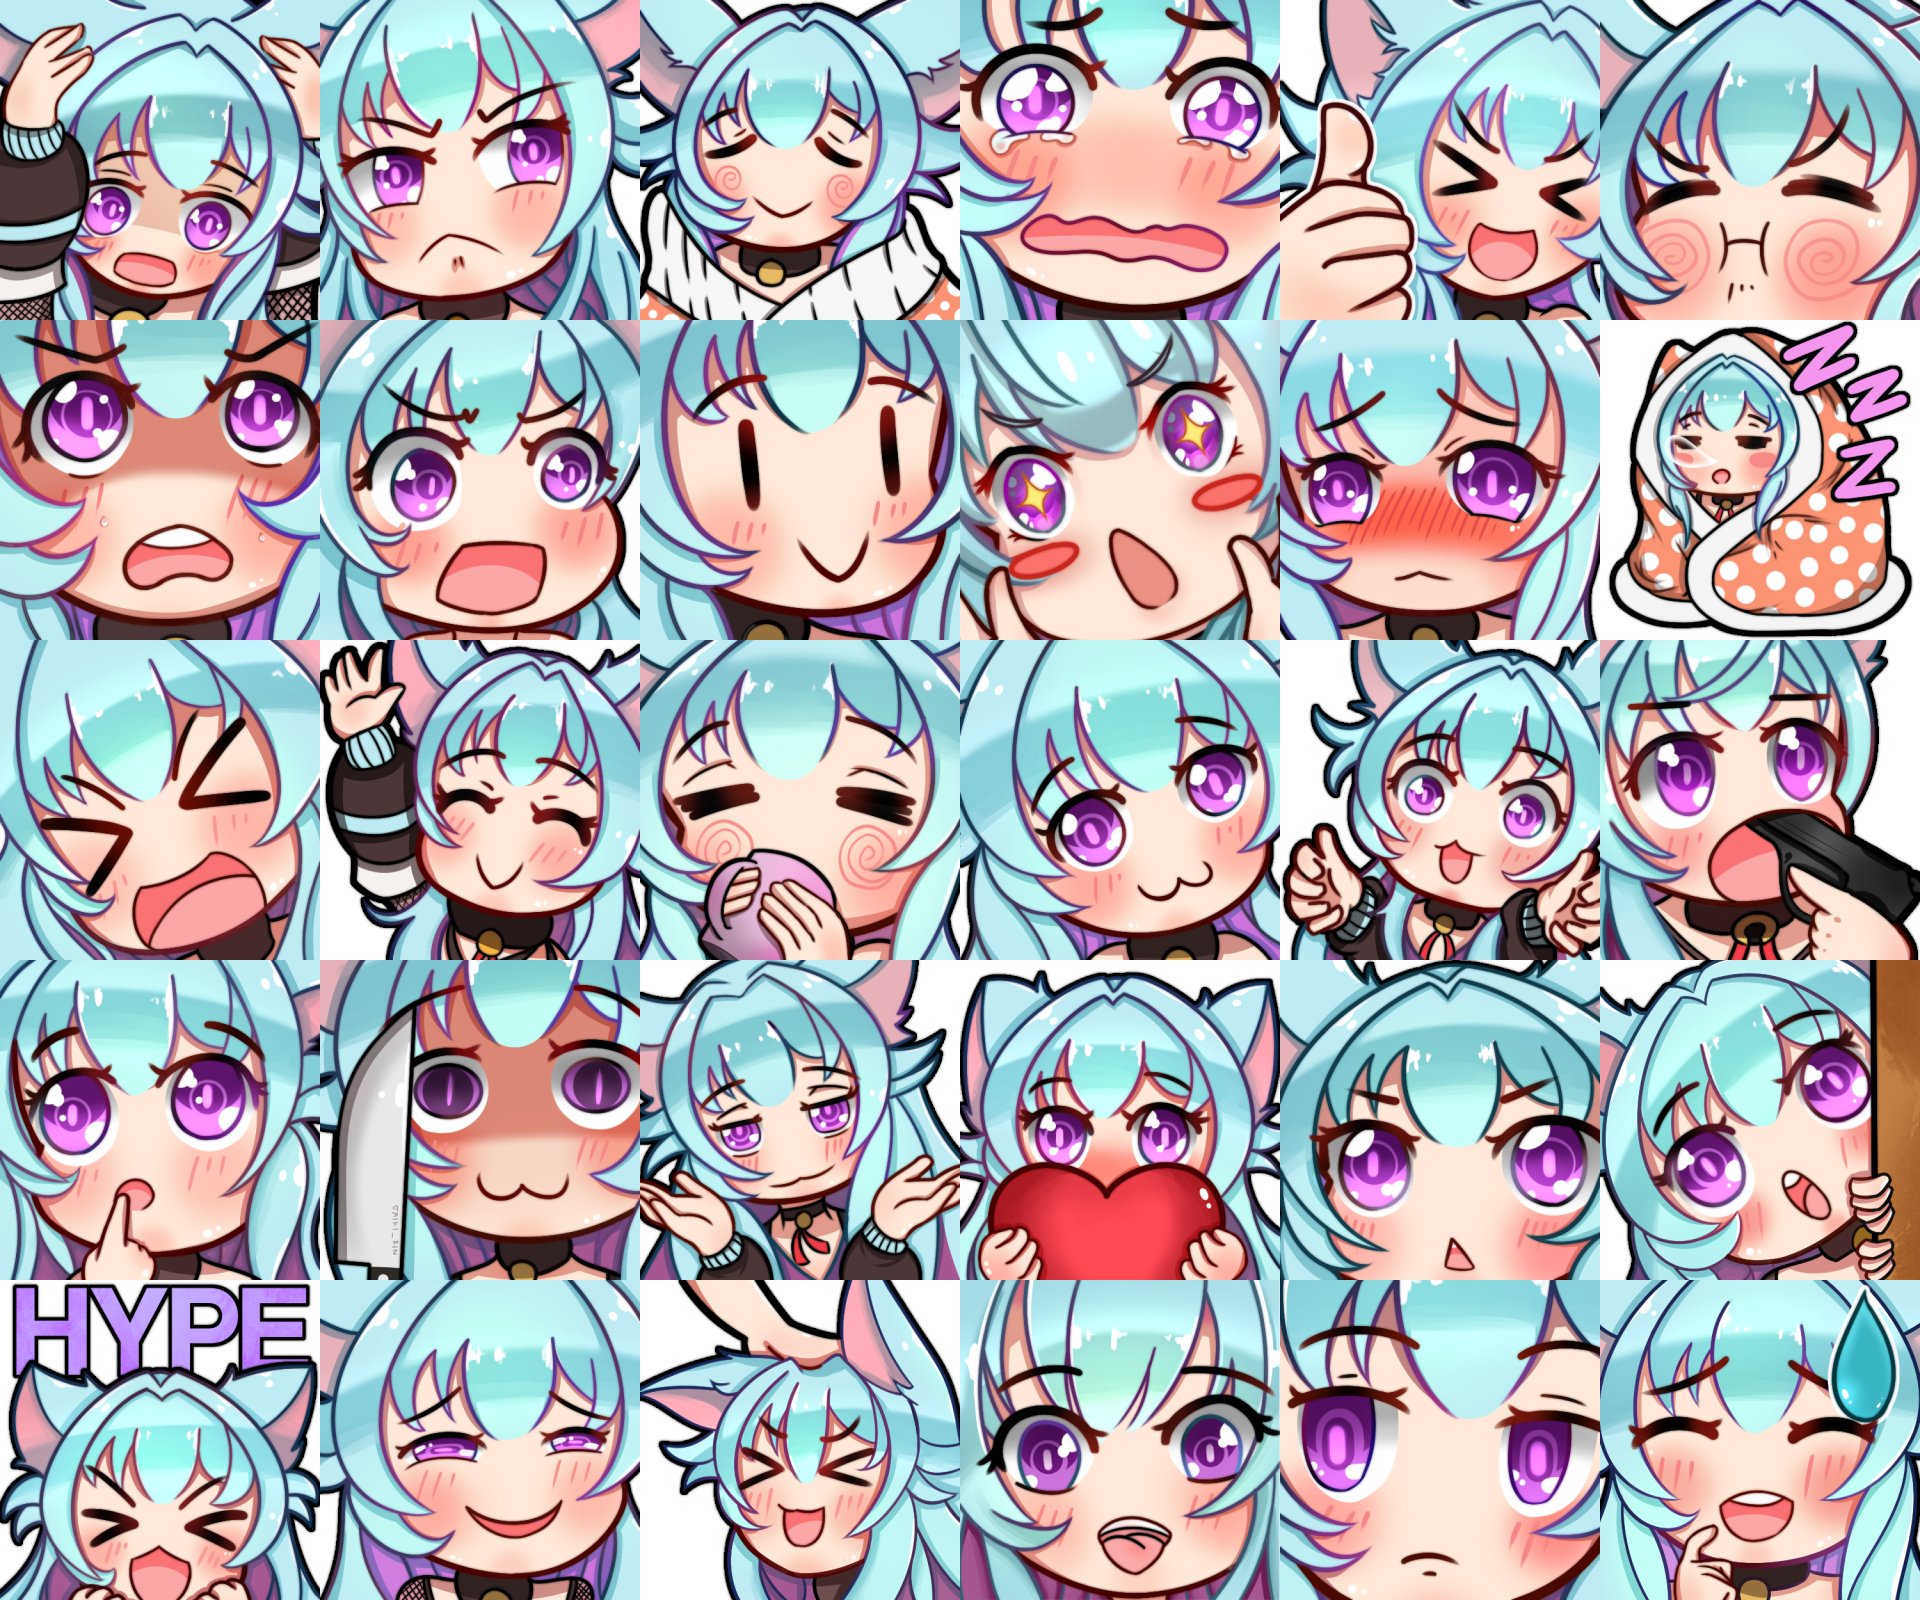 honey 💐 on X: #VTuber s, drop your PNG below and i'll draw you an anya  meme emote on stream tonight~ i should have time for 3-4 but we'll see how  it